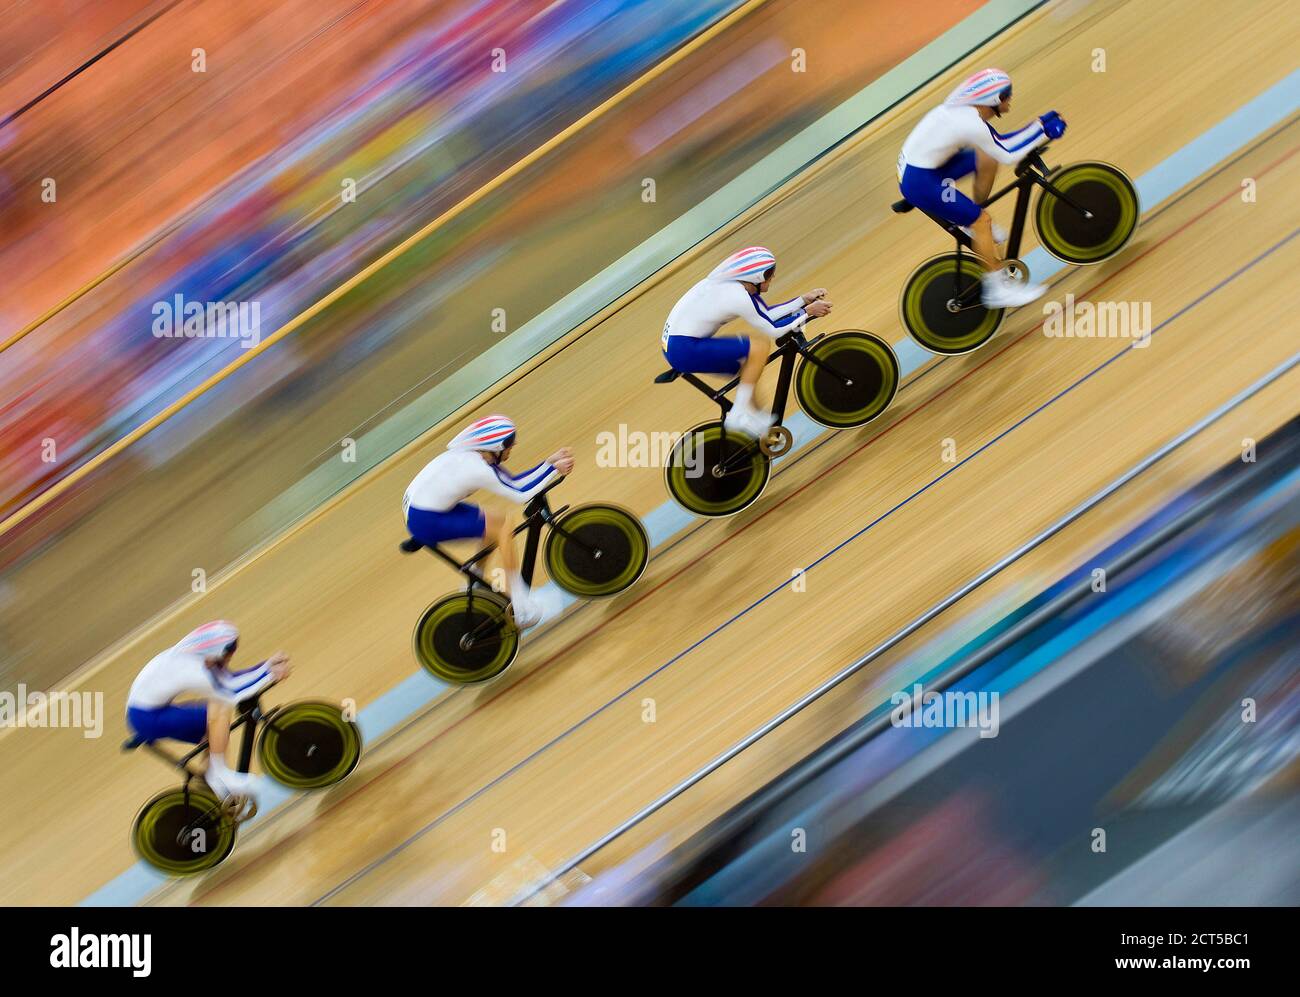 THE MENS TEAM PURSUIT CYCLISTS OF GREAT BRITAIN BREAK THE WORLD RECORD. LONDON 2012 OLYMPICS. PICTURE CREDIT : Ì MARK PAIN / ALAMY Stock Photo